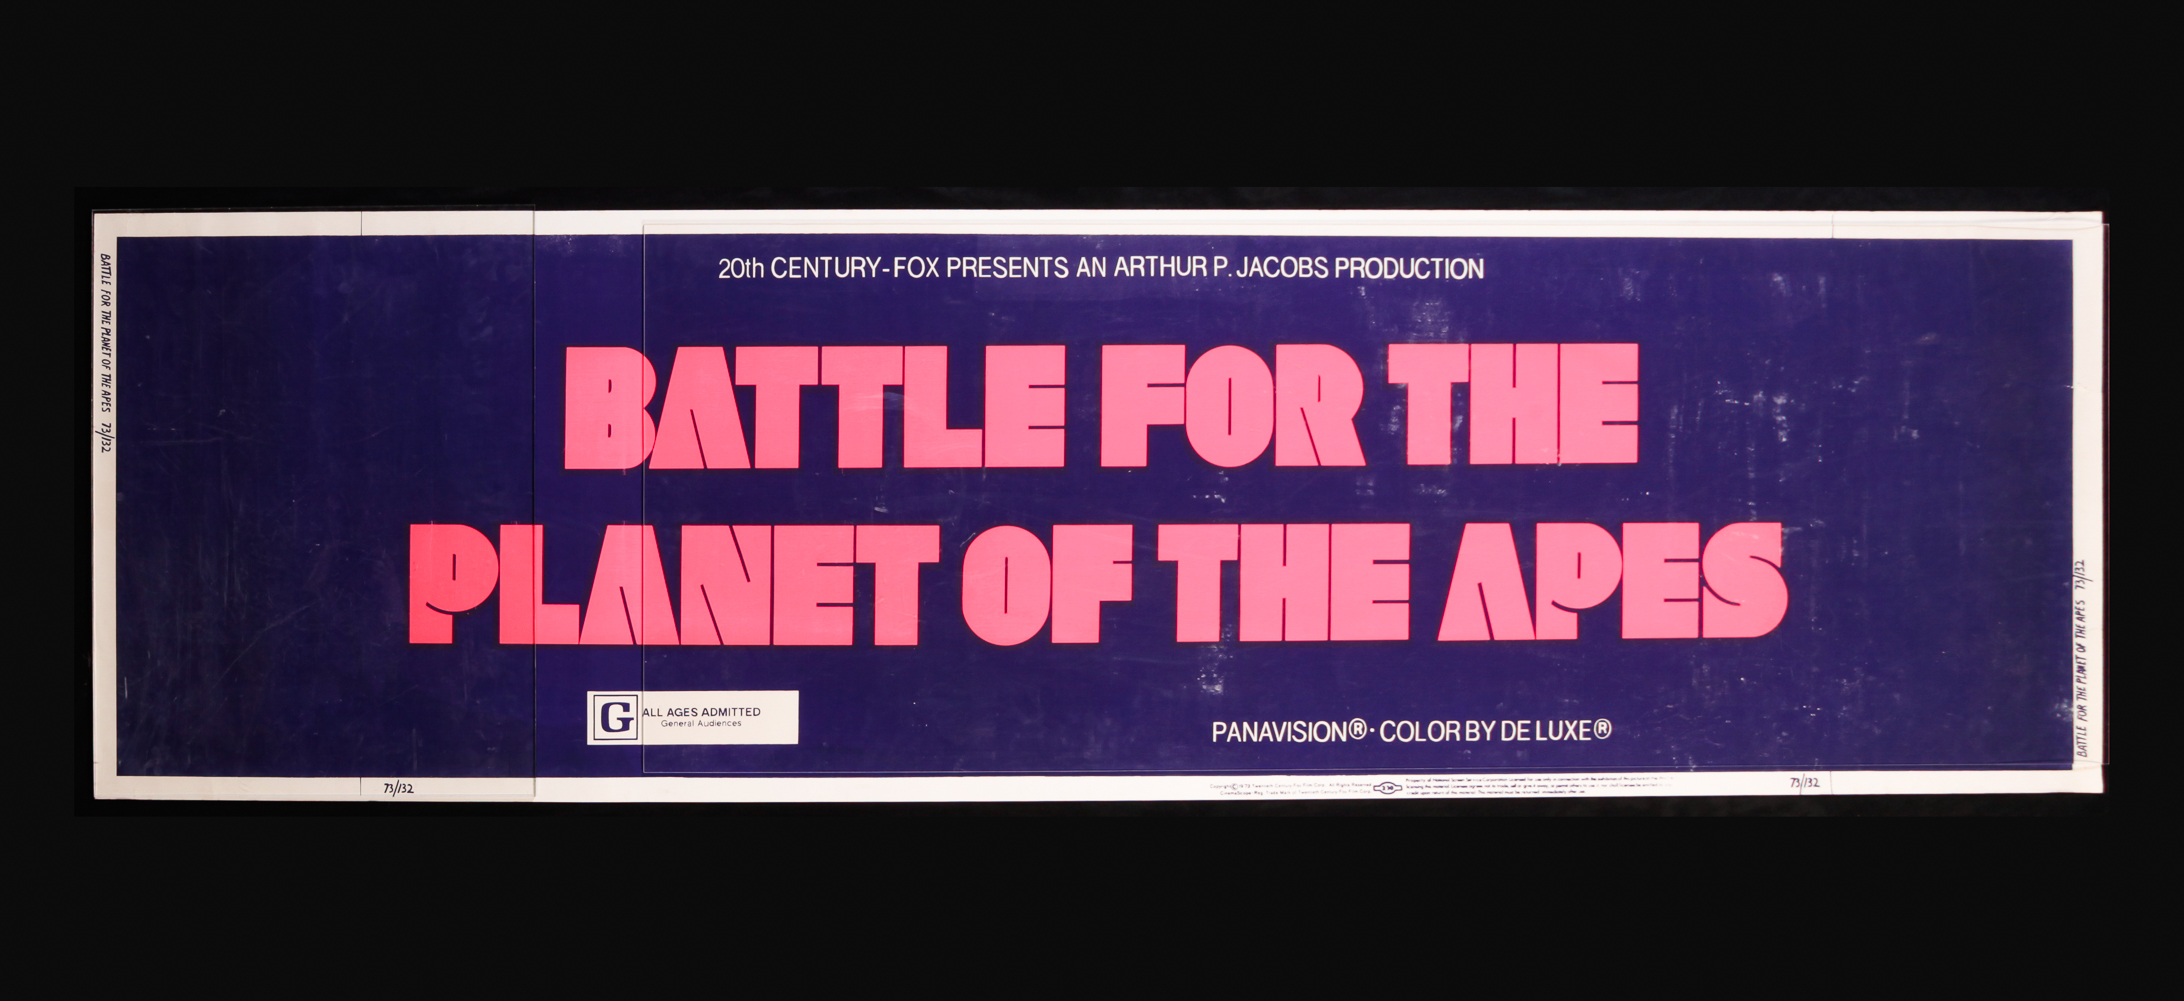 BATTLE FOR THE PLANET OF THE APES 2dfafc